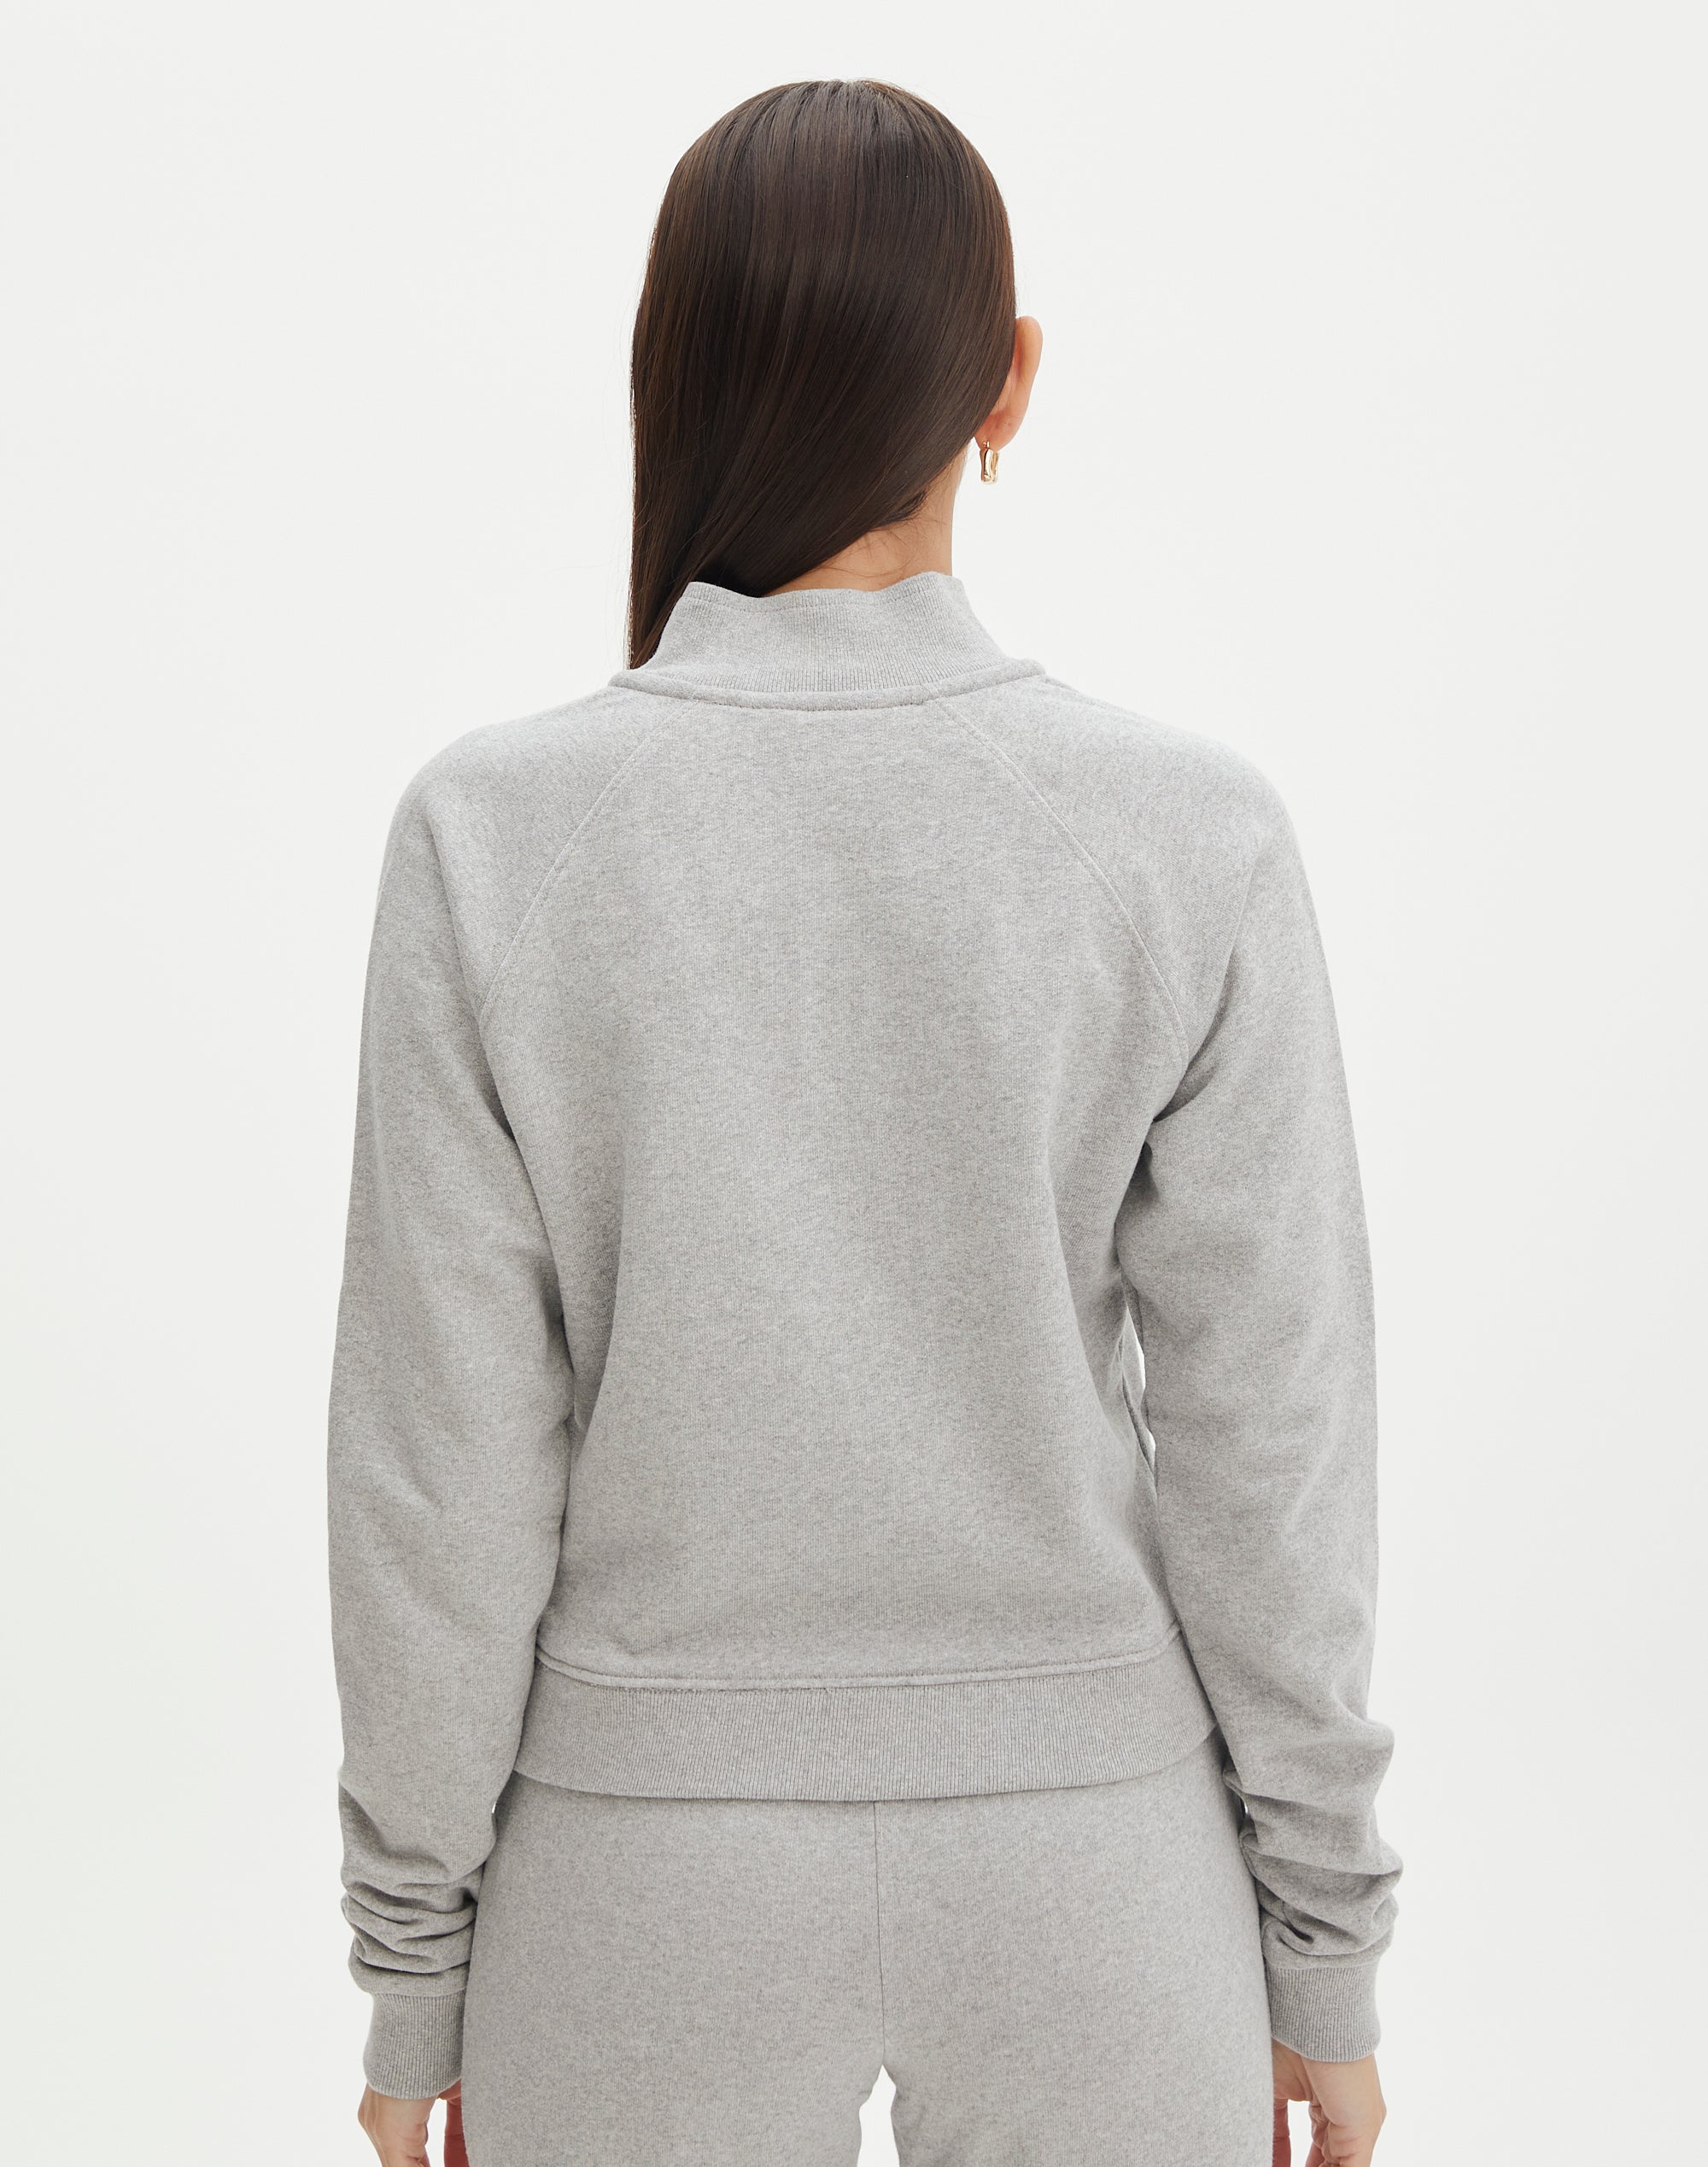 Grey Speckle Long Sleeve Zip Up Sports Top